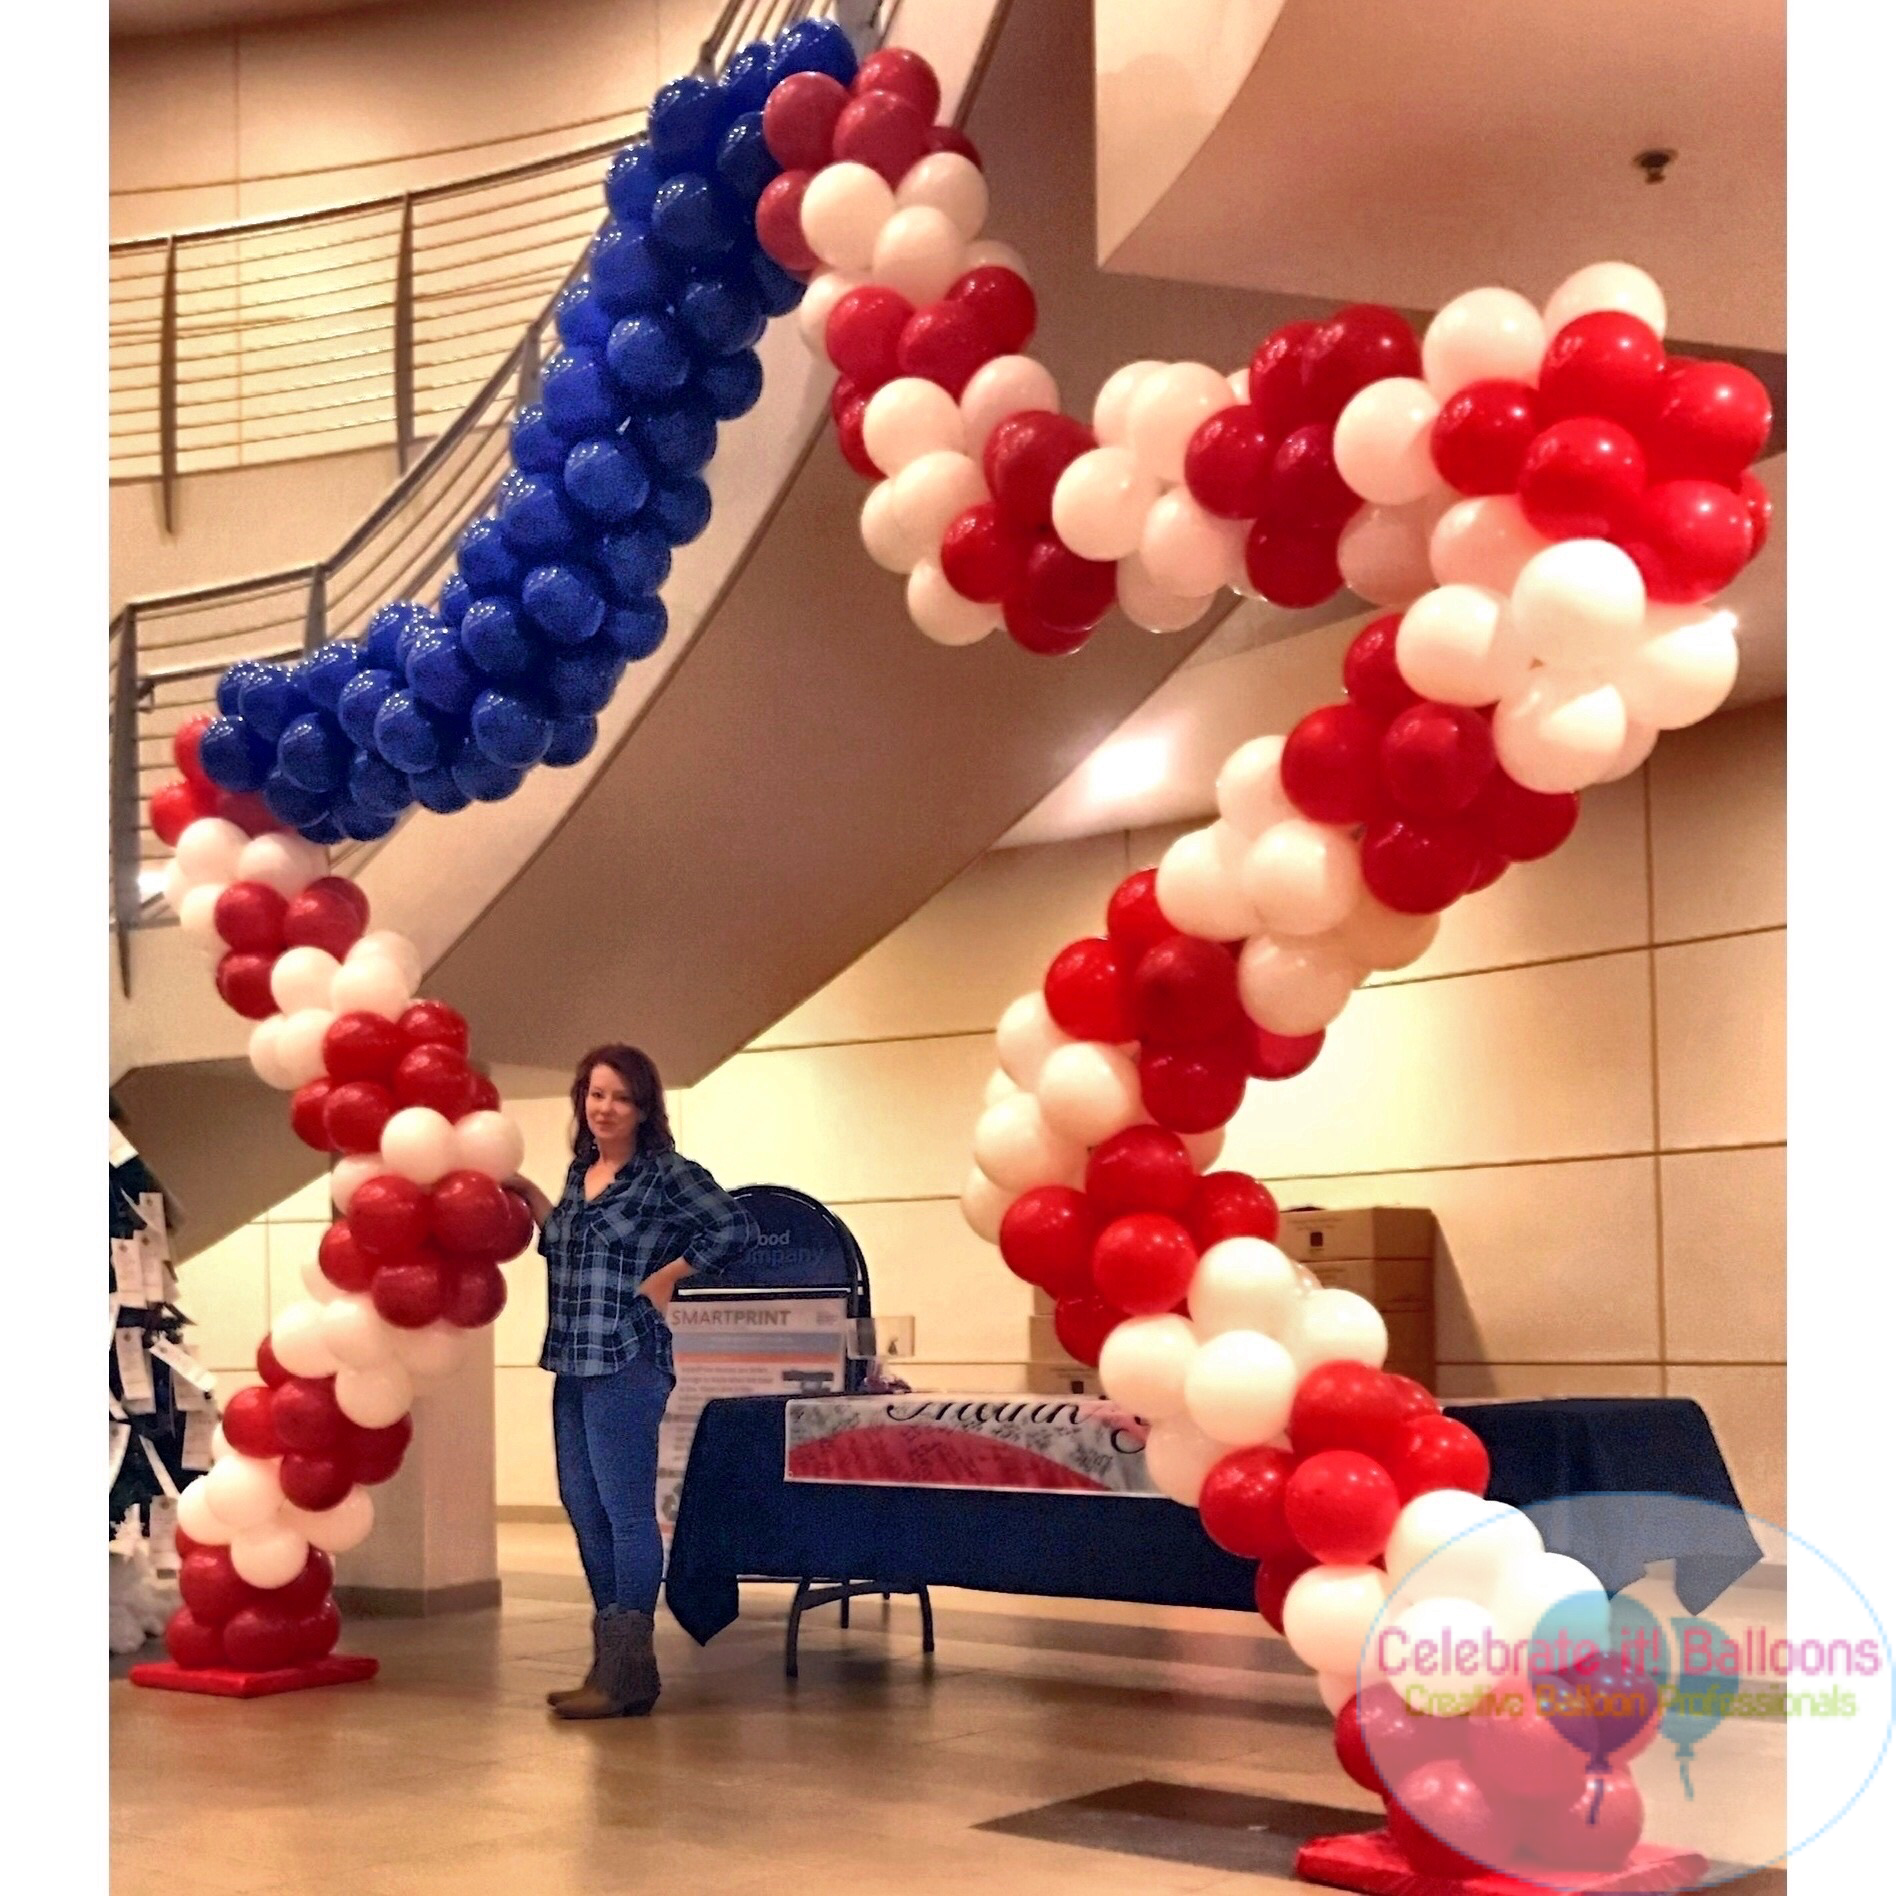 Large star shaped balloon arch in red, white and blue